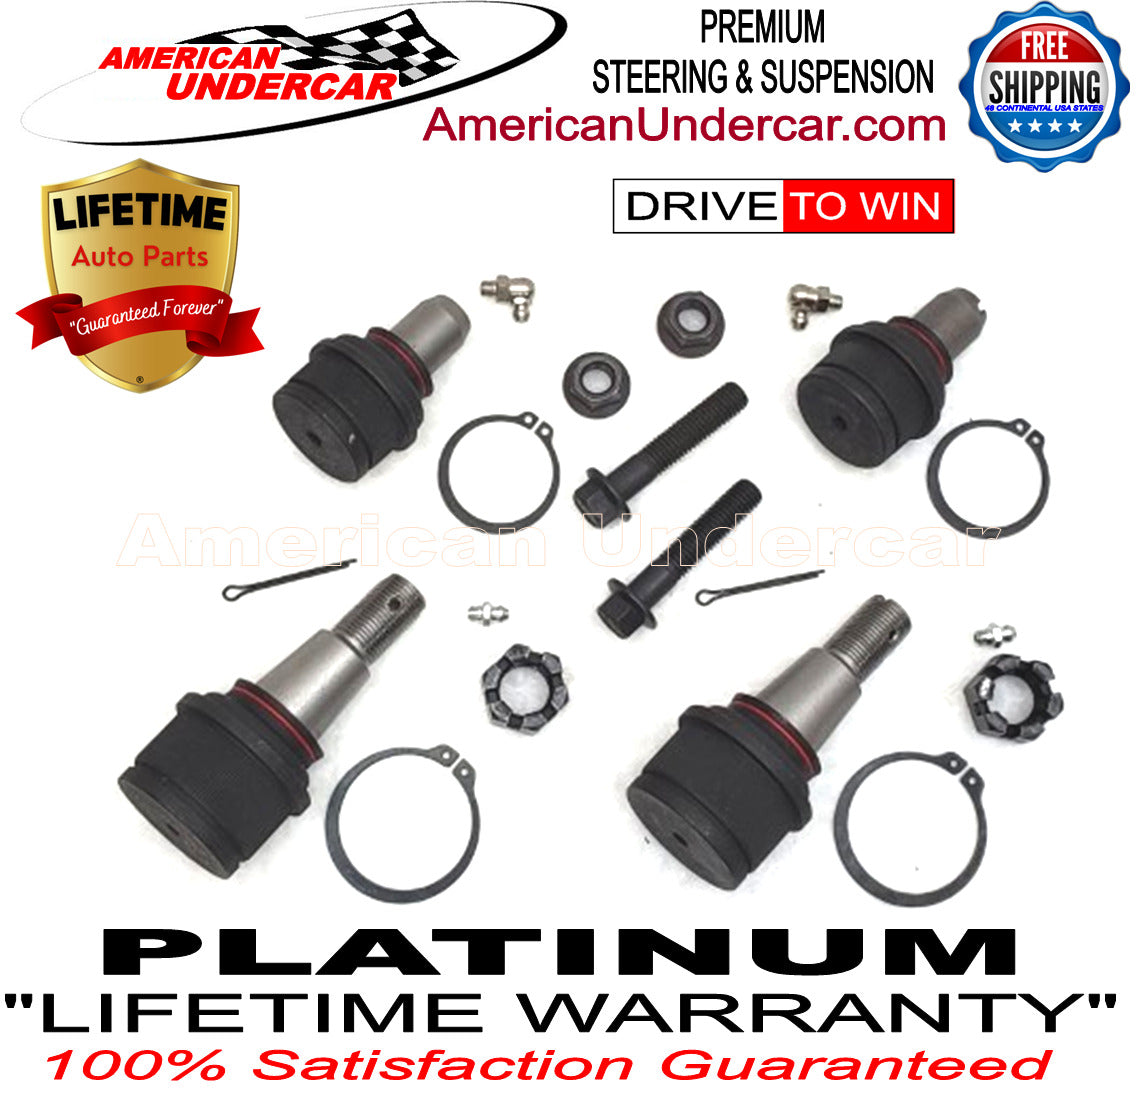 Lifetime Ball Joint Upper and Lower Kit for 1999-2022 Ford F250 Super Duty 2WD